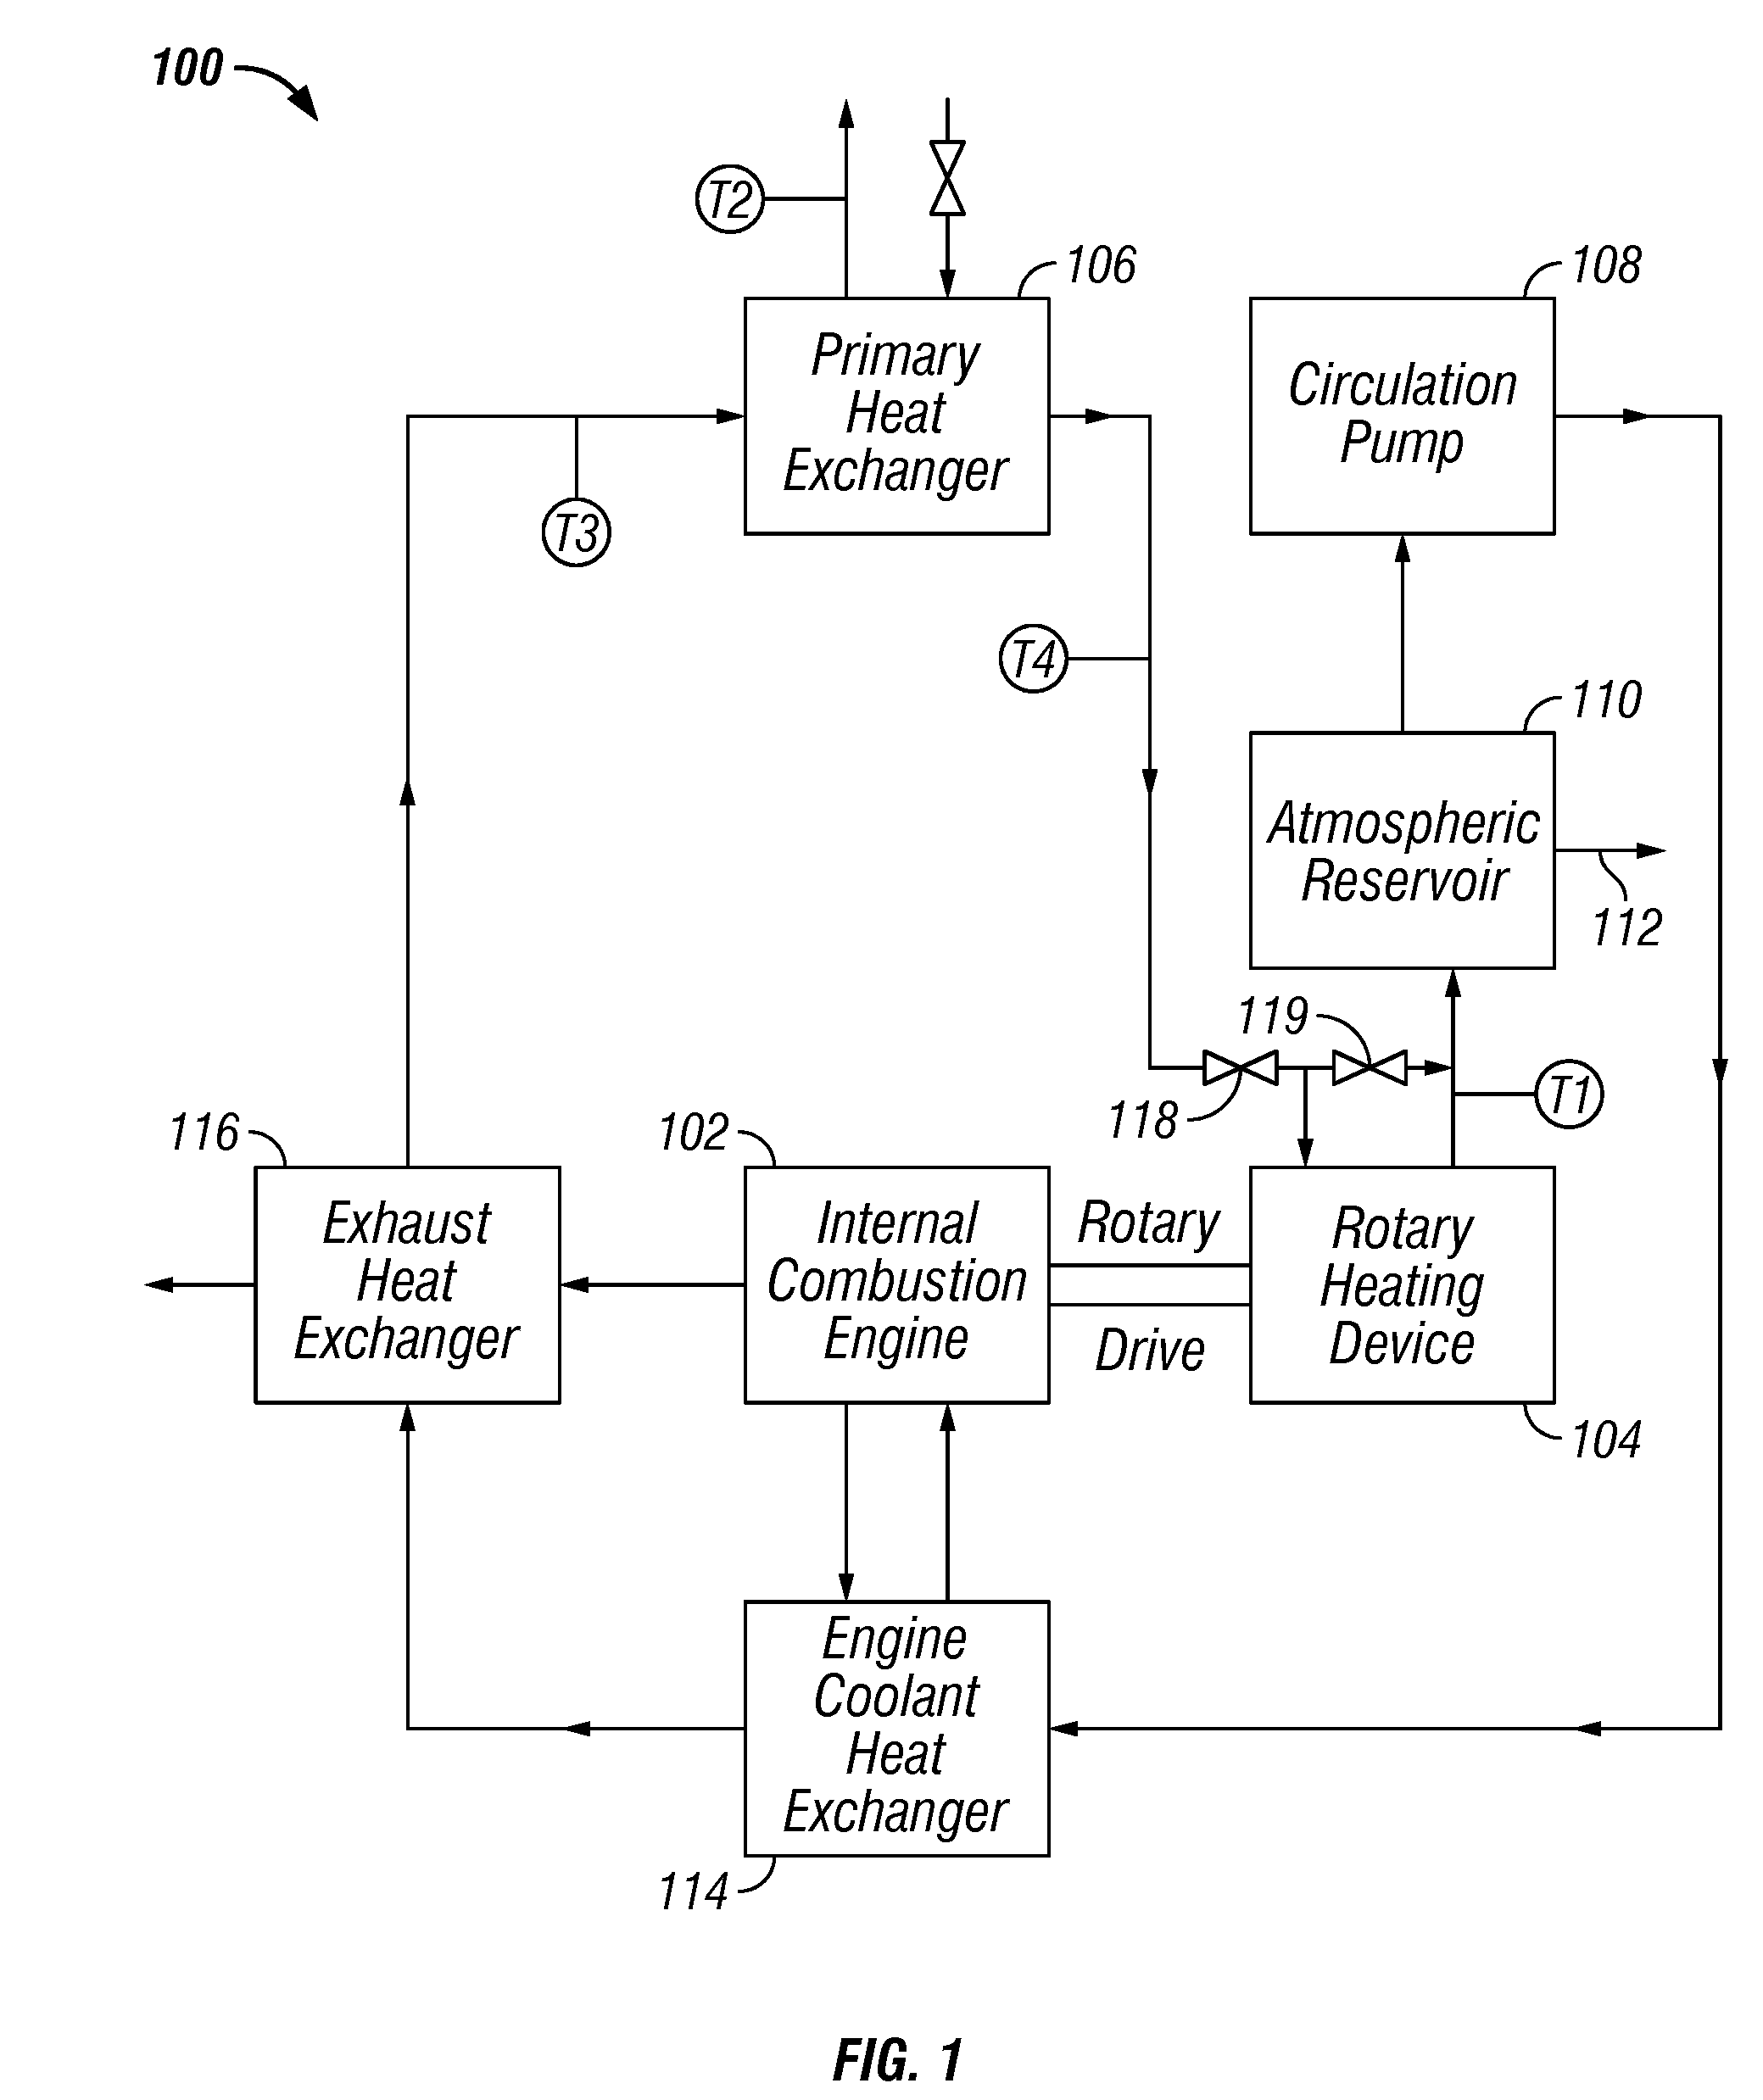 Method and apparatus for heating, concentrating and evaporating fluid